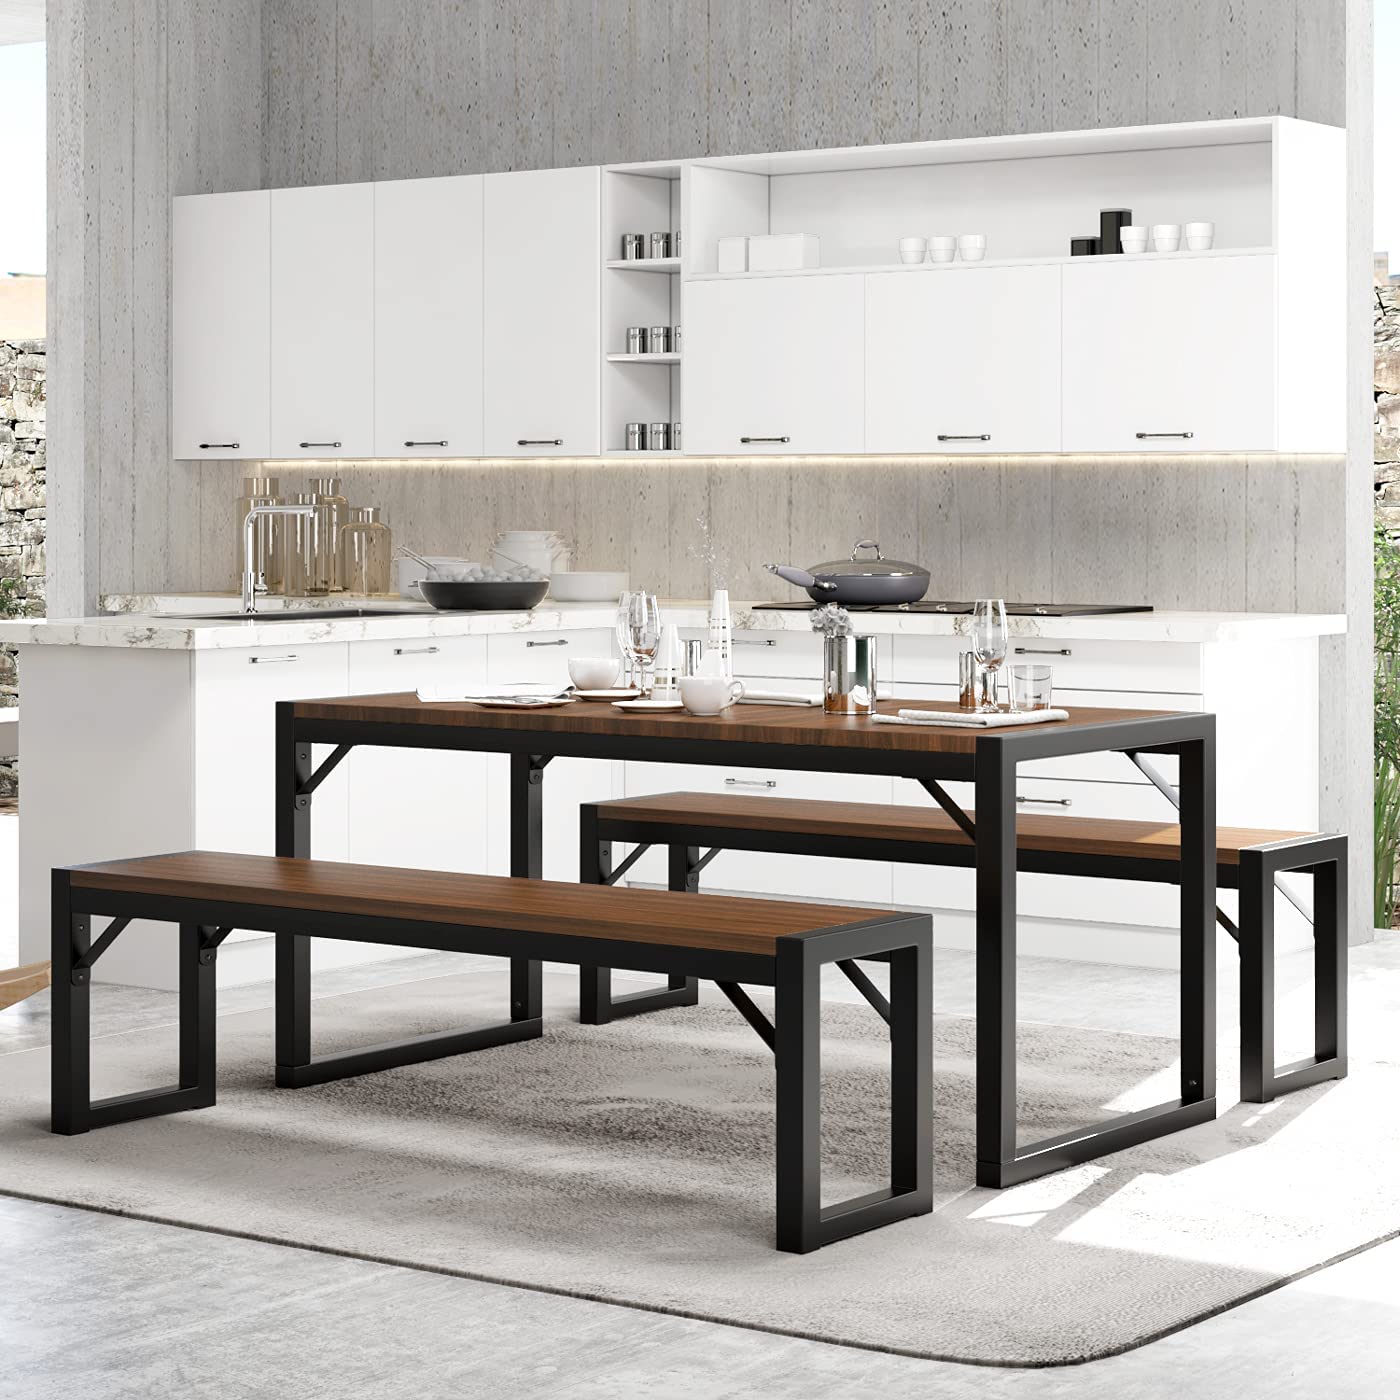 IMUsee Industrial Soho Bench & Table Kitchen Dining Set, 3-Piece